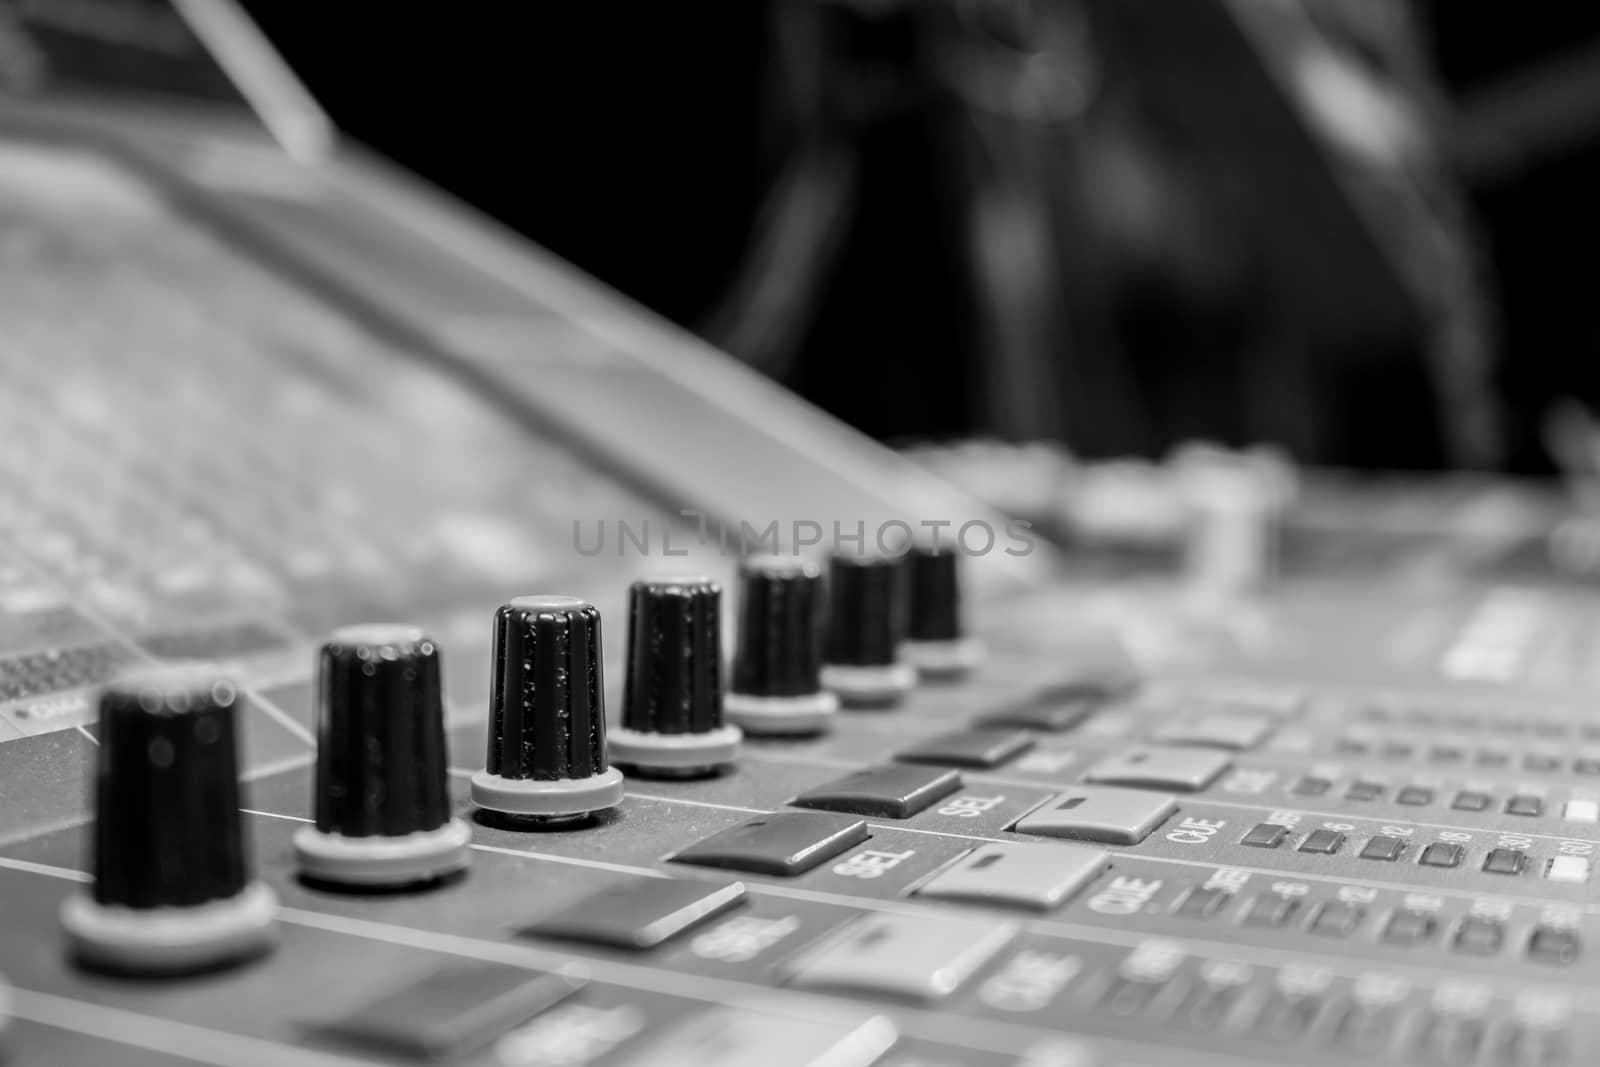 Professional Audio Mixing Board/ Console by ernest_davies